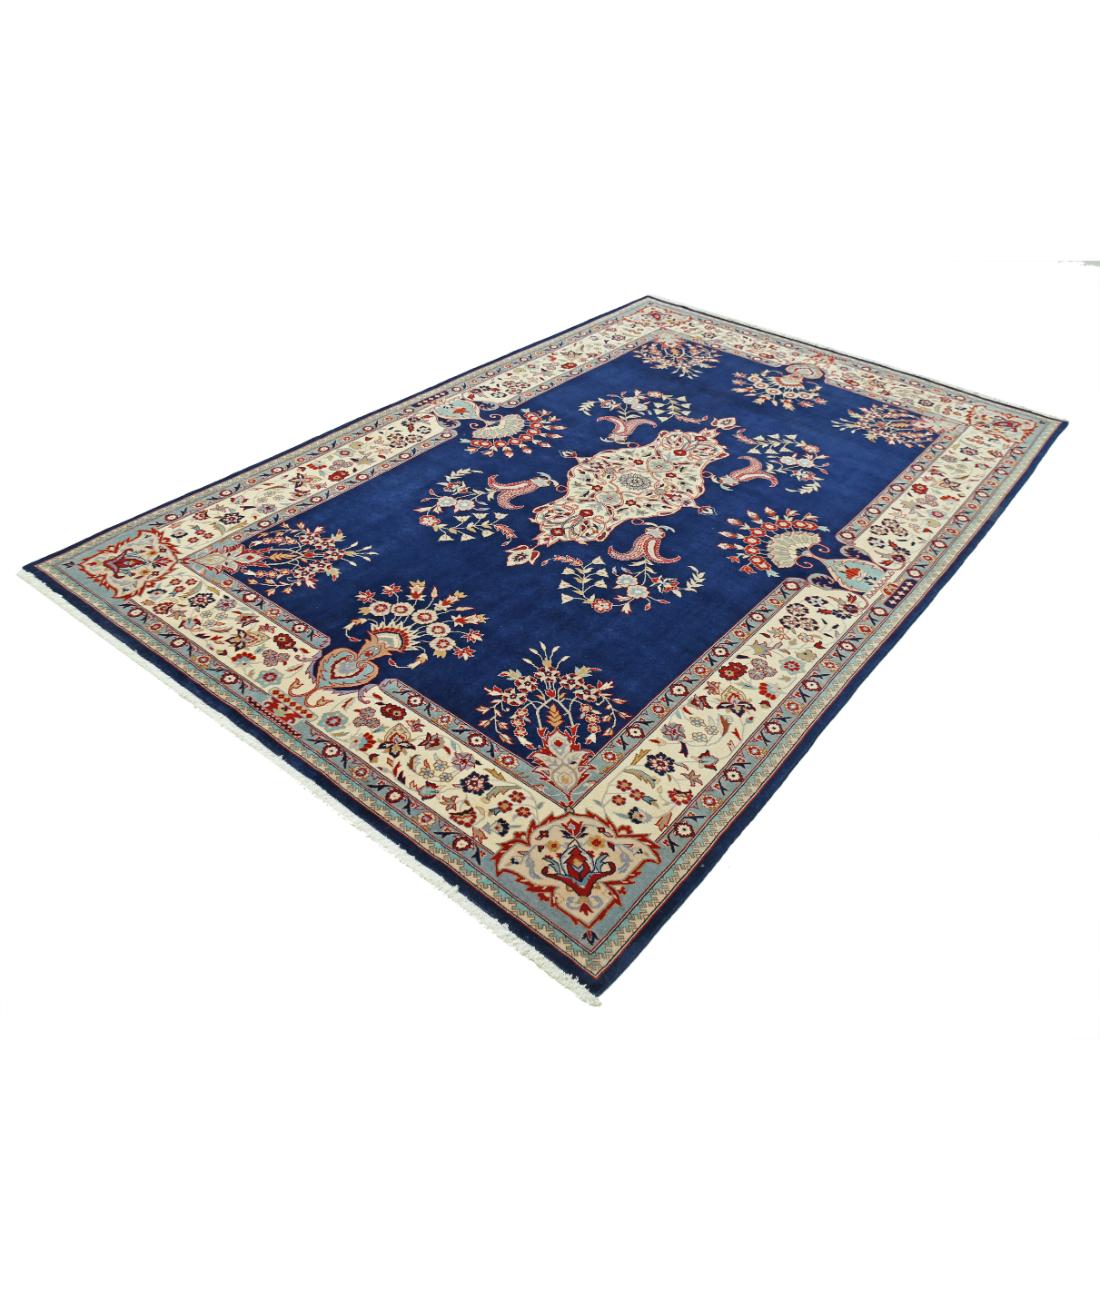 Hand Knotted Heritage Persian Style Wool Rug - 5'11'' x 8'11'' 5' 11" X 8' 11" (180 X 272) / Blue / Ivory